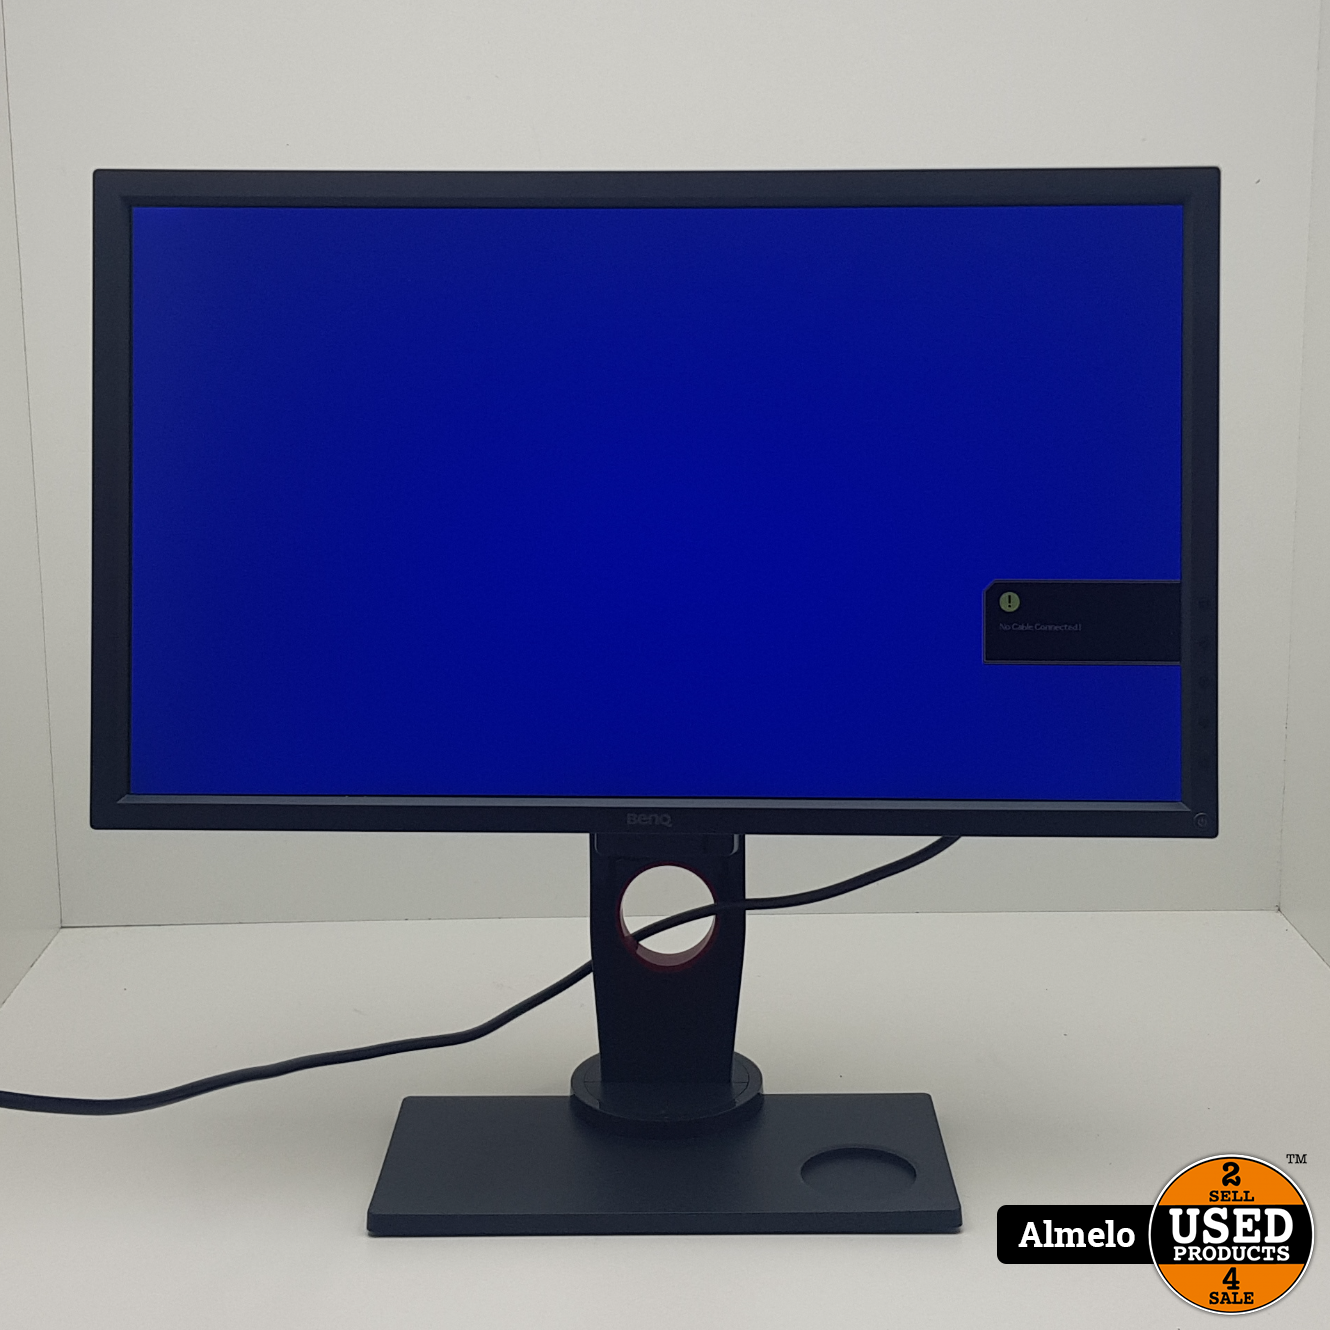 Republiek Superioriteit Teleurstelling Benq LCD Monitor 24 inch XL2430t - Used Products Almelo